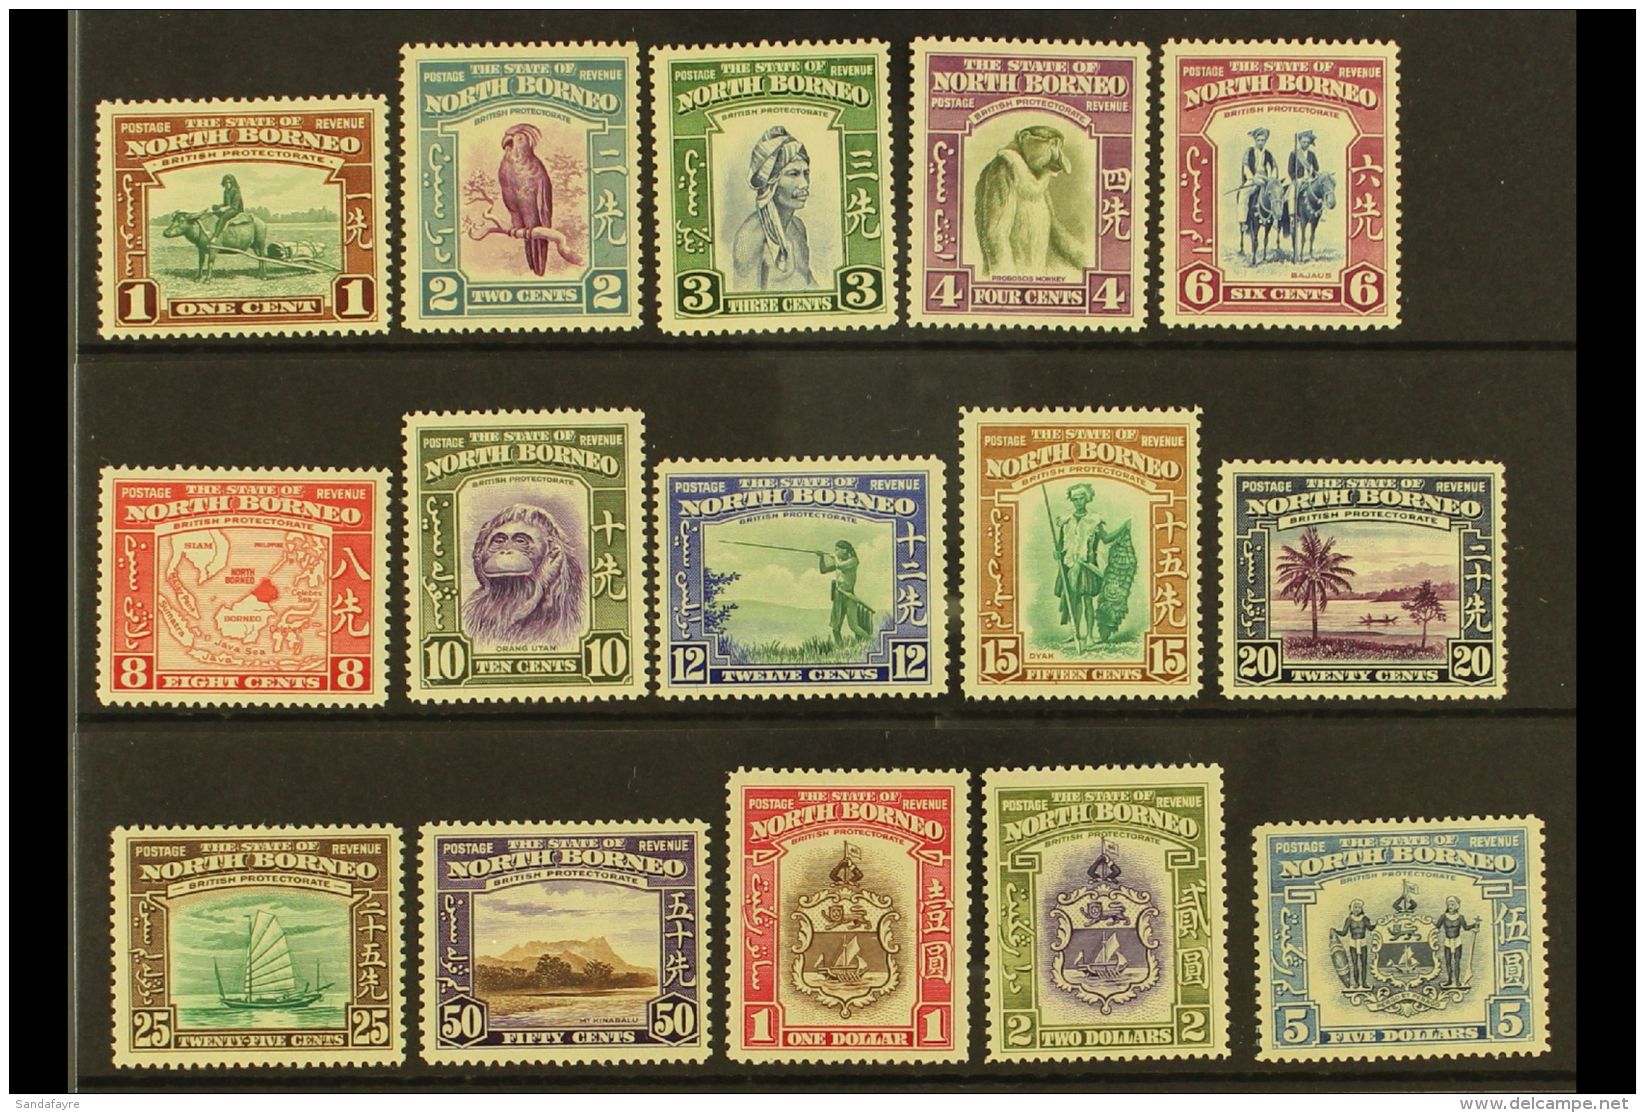 1939 Pictorials Complete Set, SG 303/17, Very Fine Mint, Lovely Fresh Colours, Attractive. (15 Stamps) For More... - North Borneo (...-1963)